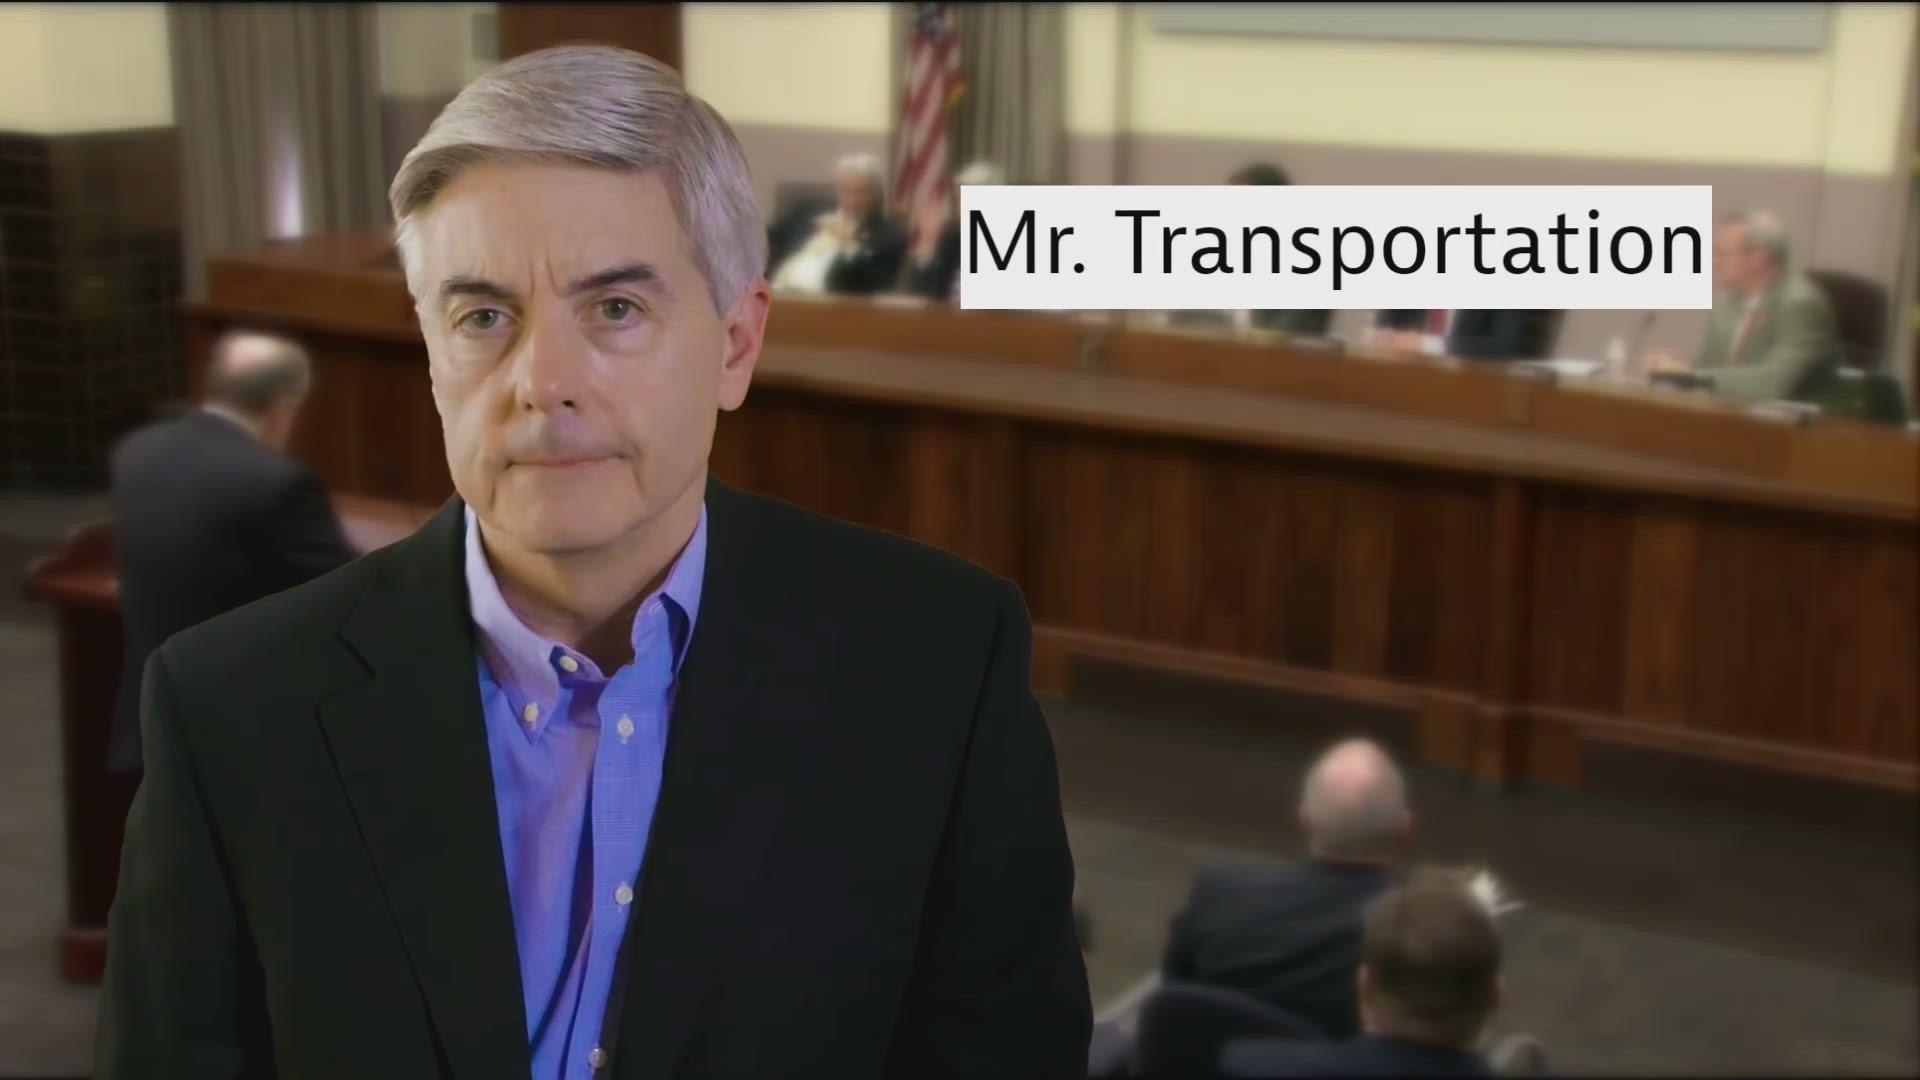 Vandergriff – sometimes called “Mr. Transportation” for his work – attended his last meeting in the governor-appointed TxDOT commissioner role on January 25, 2018.